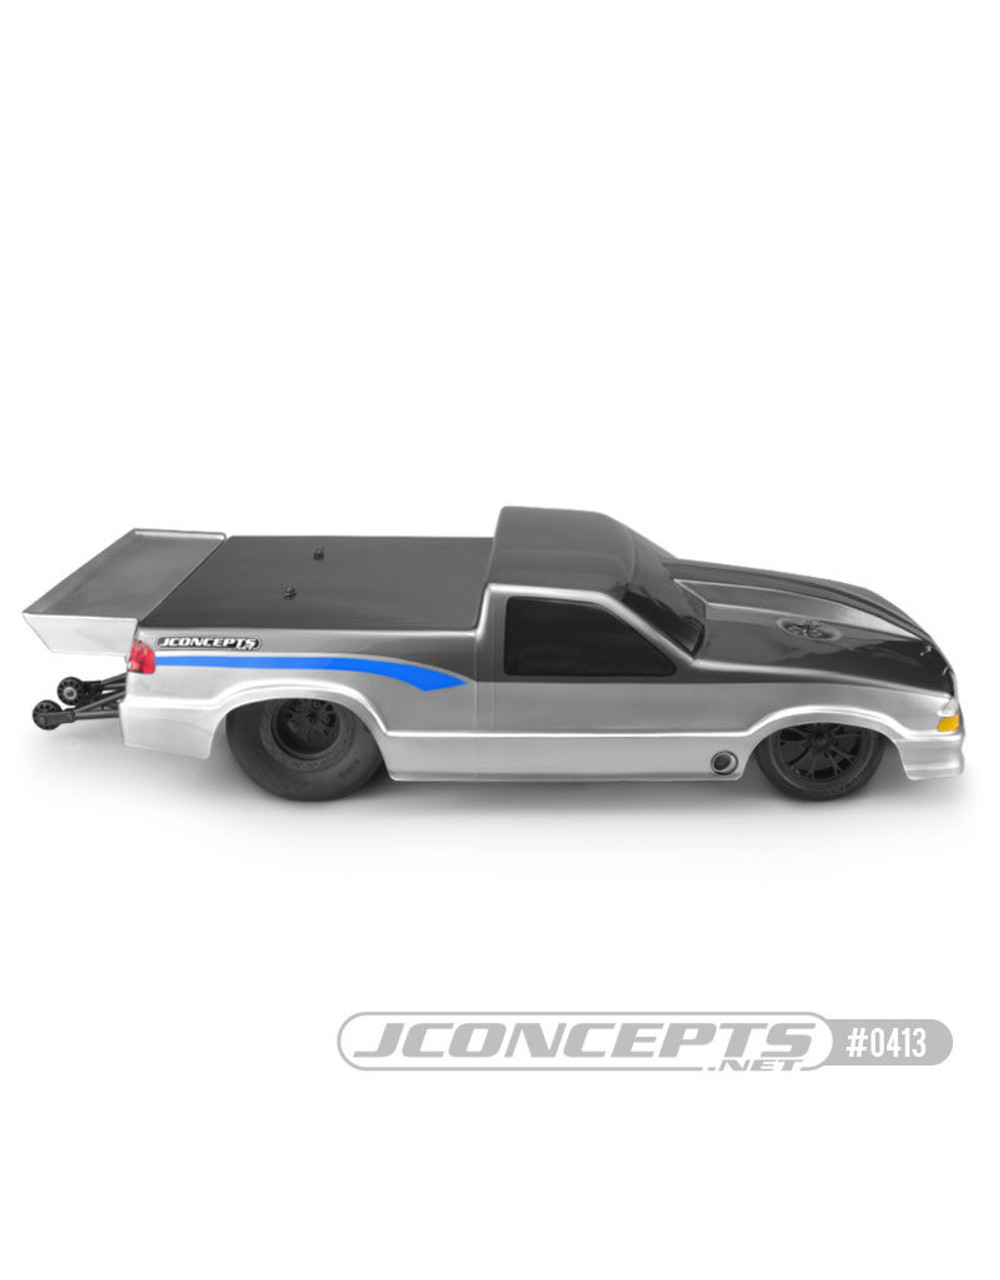 JConcepts 0413 2002 Chevy S10 Drag Truck Street Eliminator Drag Racing Body (Clear)